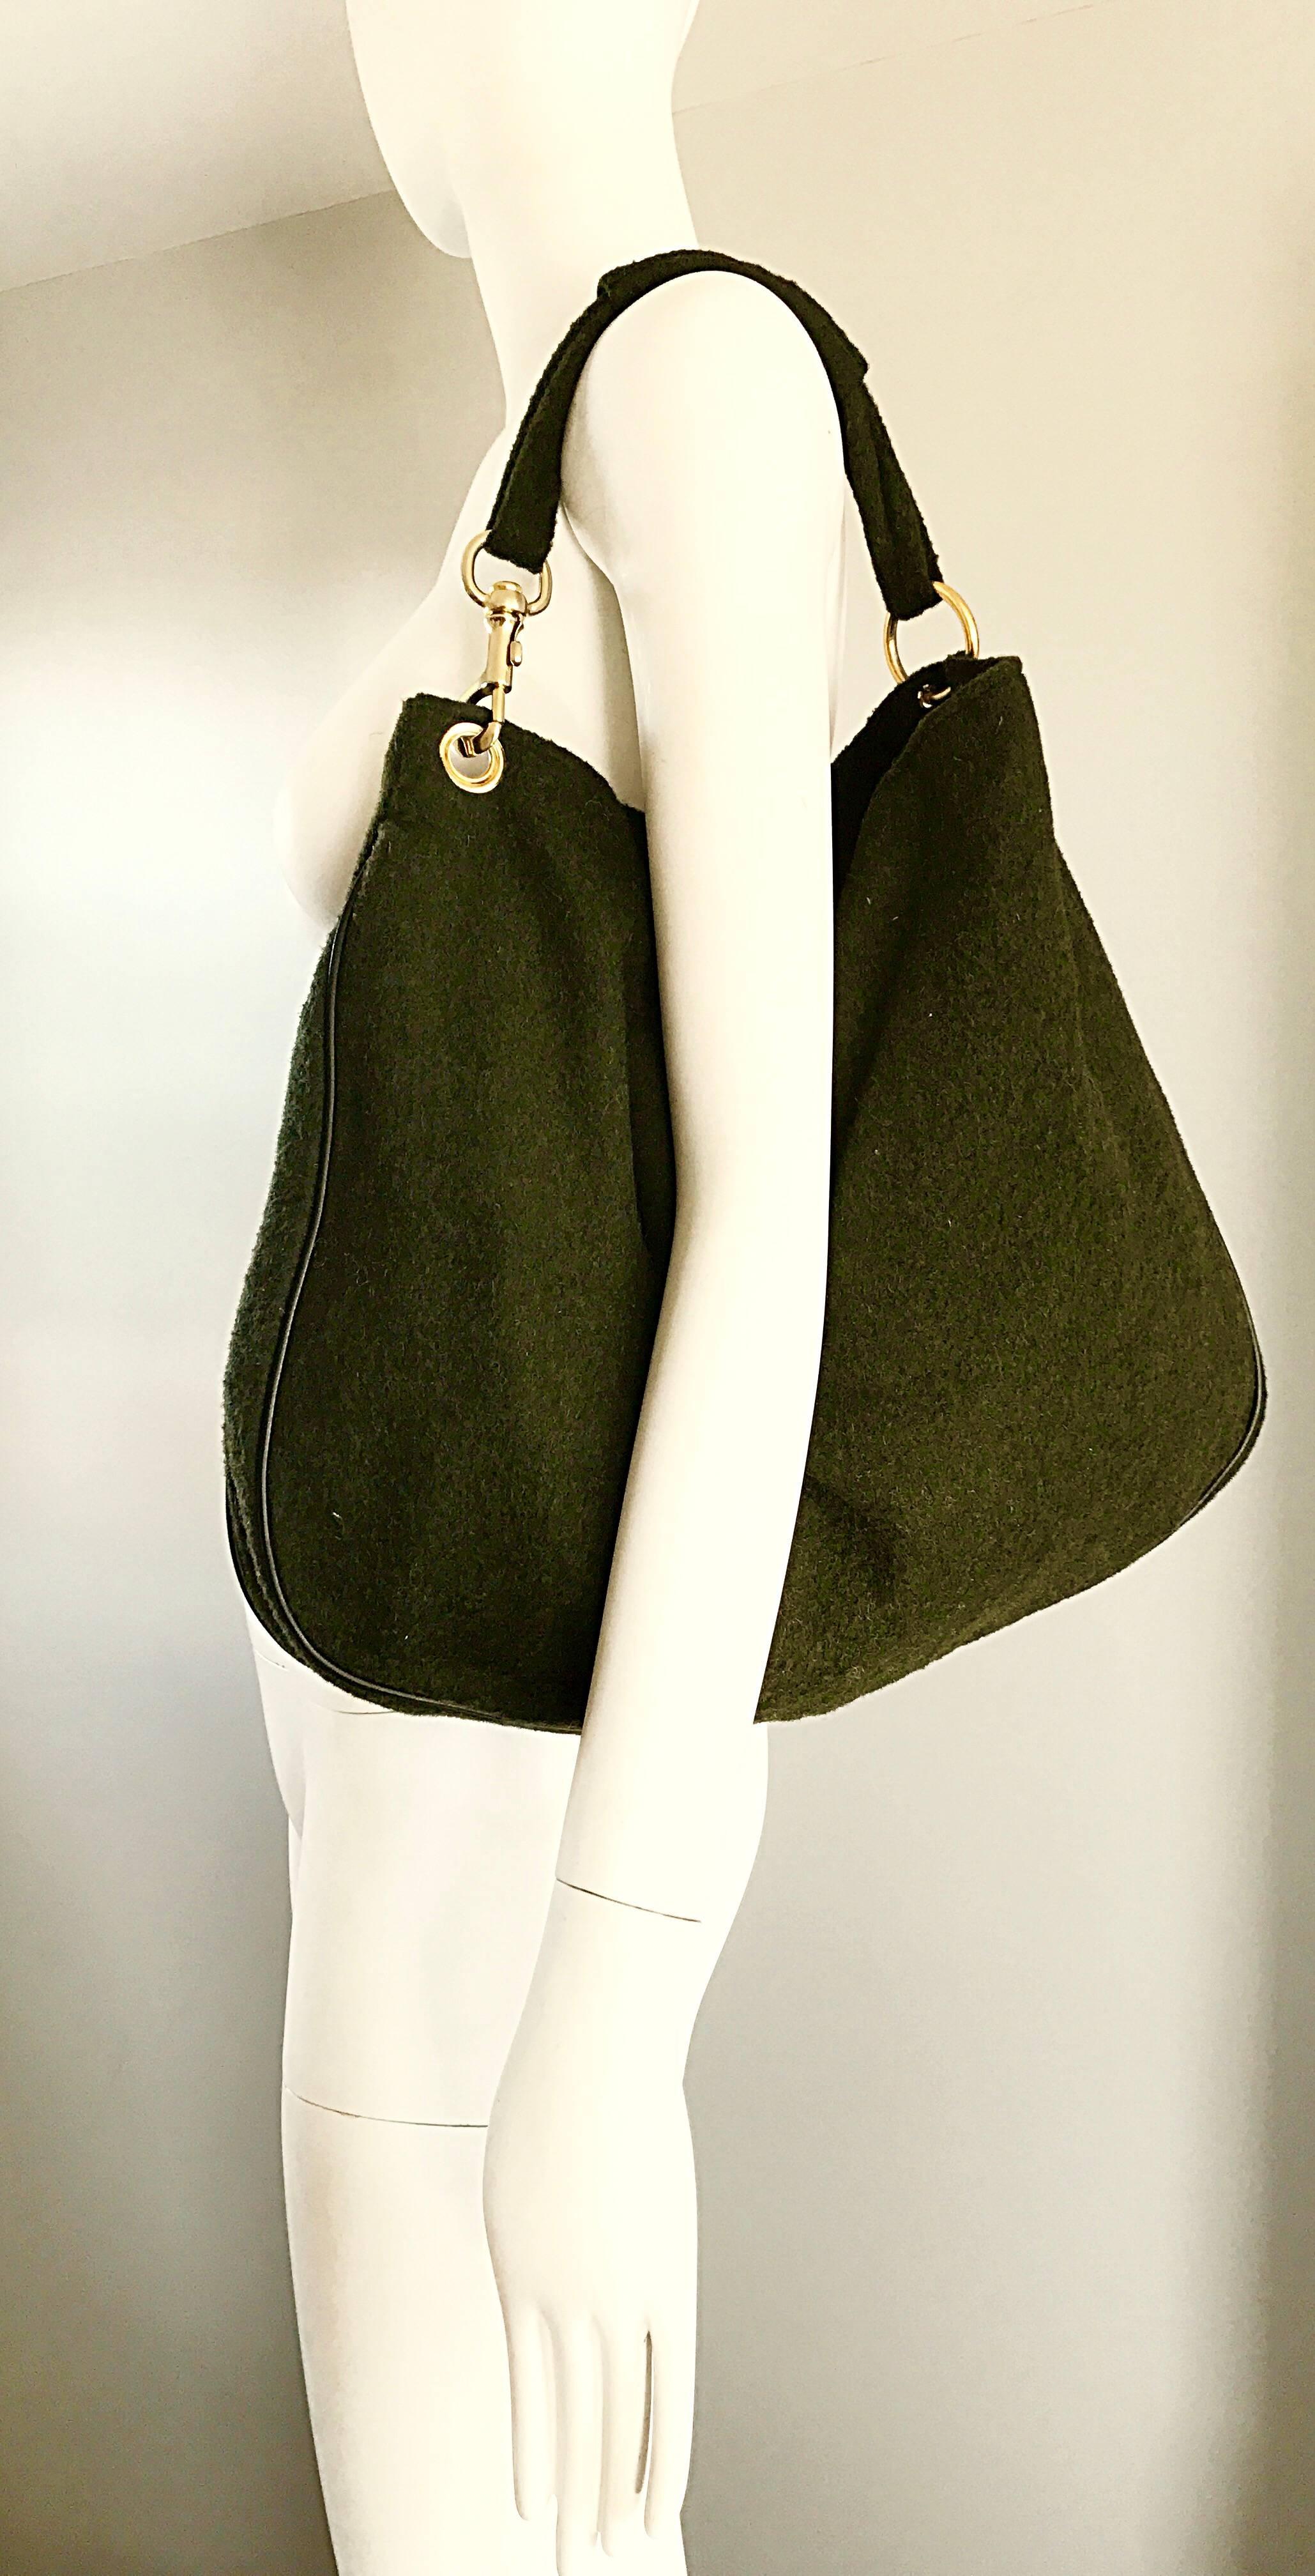 Chic and practical 1960s JOSPEH MAGNIN Italian made dark forest green virgin wool and leather JUMBO hobo handbag! Allover gorgeous dark green soft wool, with leather piping at edges. Strong snap closure. Handle in the same green wool, with removable